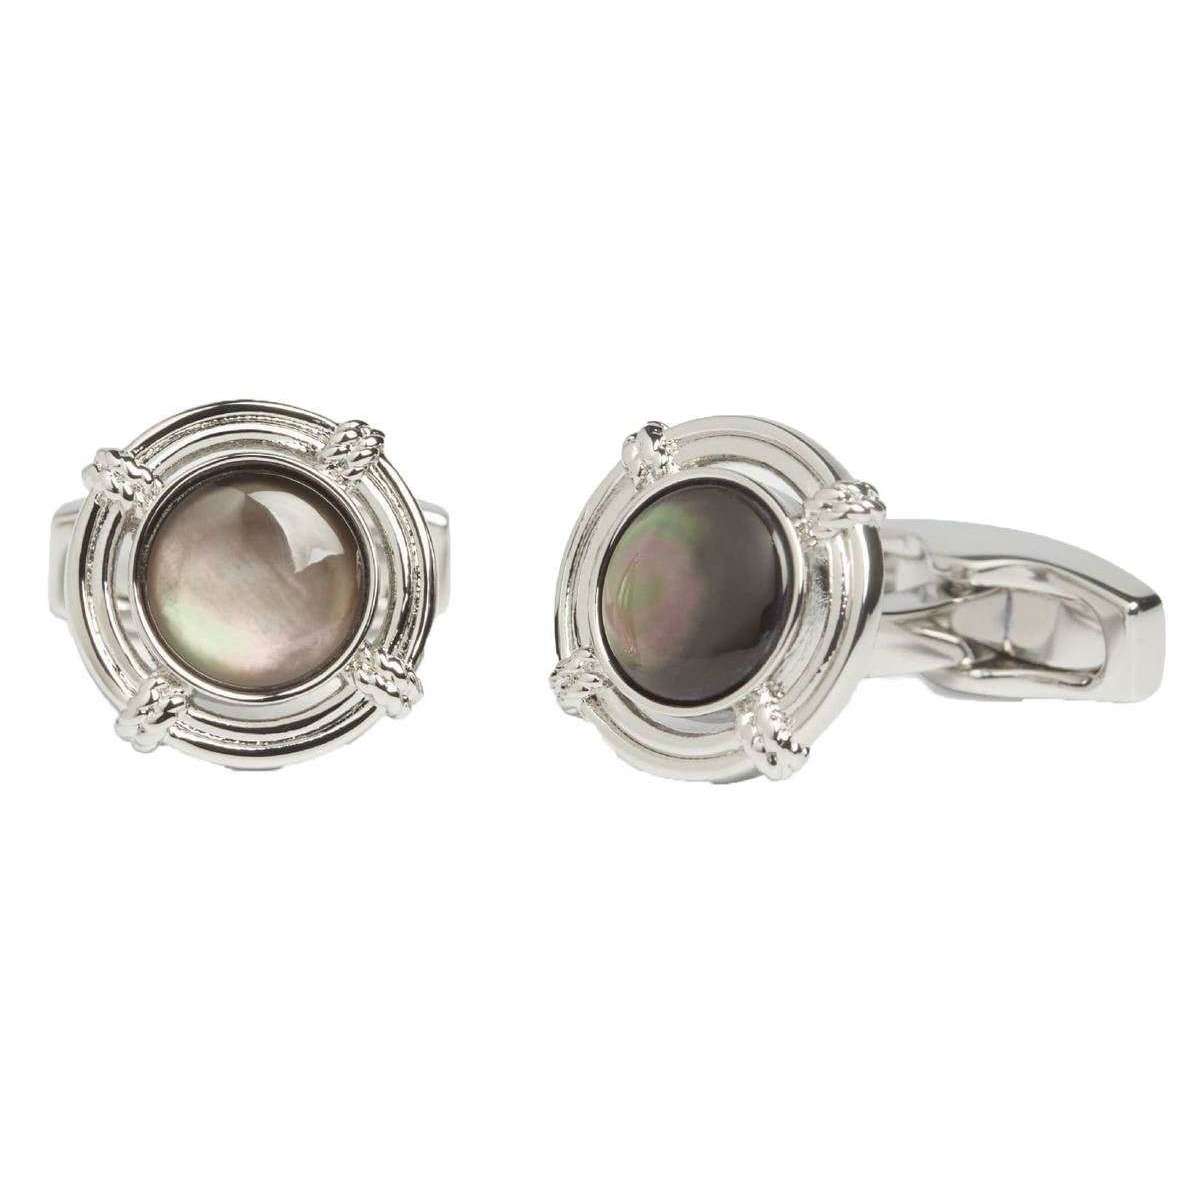 Simon Carter Mother of Pearl Life Buoy Cufflinks - Silver/Grey